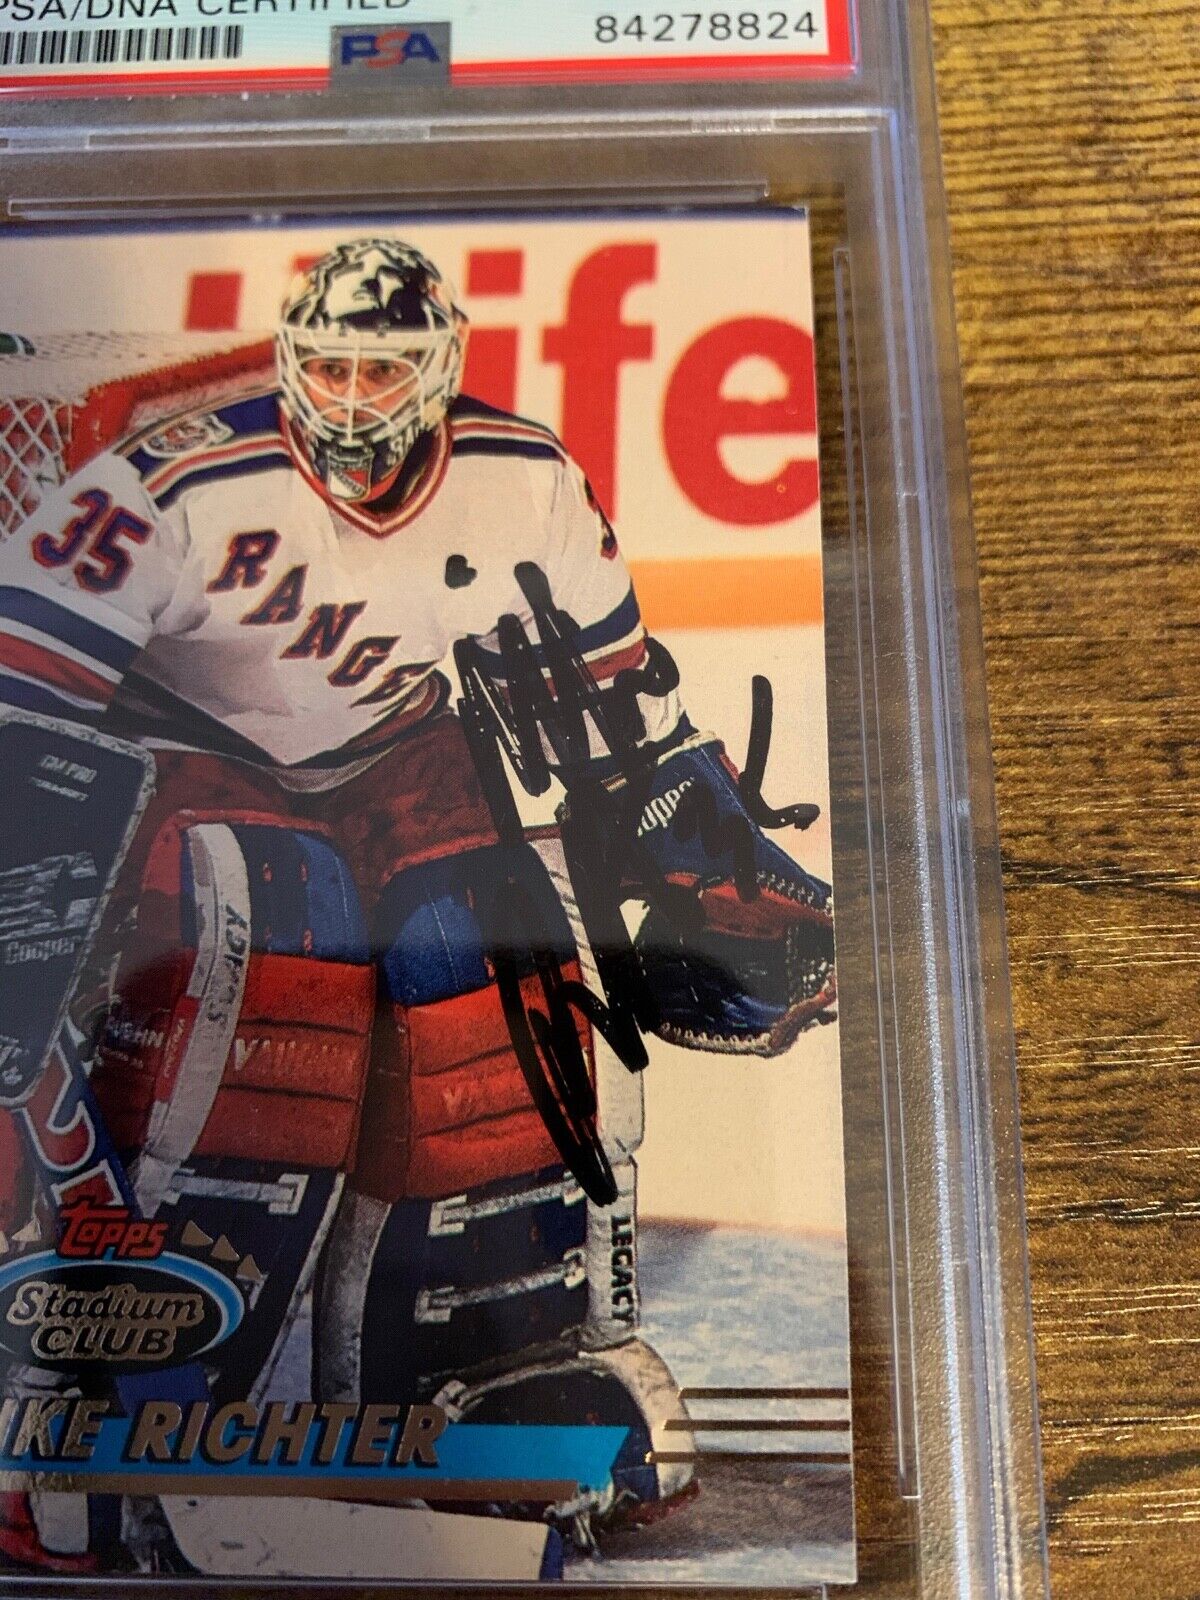 Mike Richter Autographed 1991/92 Topps Stadium Club Card PSA Certified Slabbed